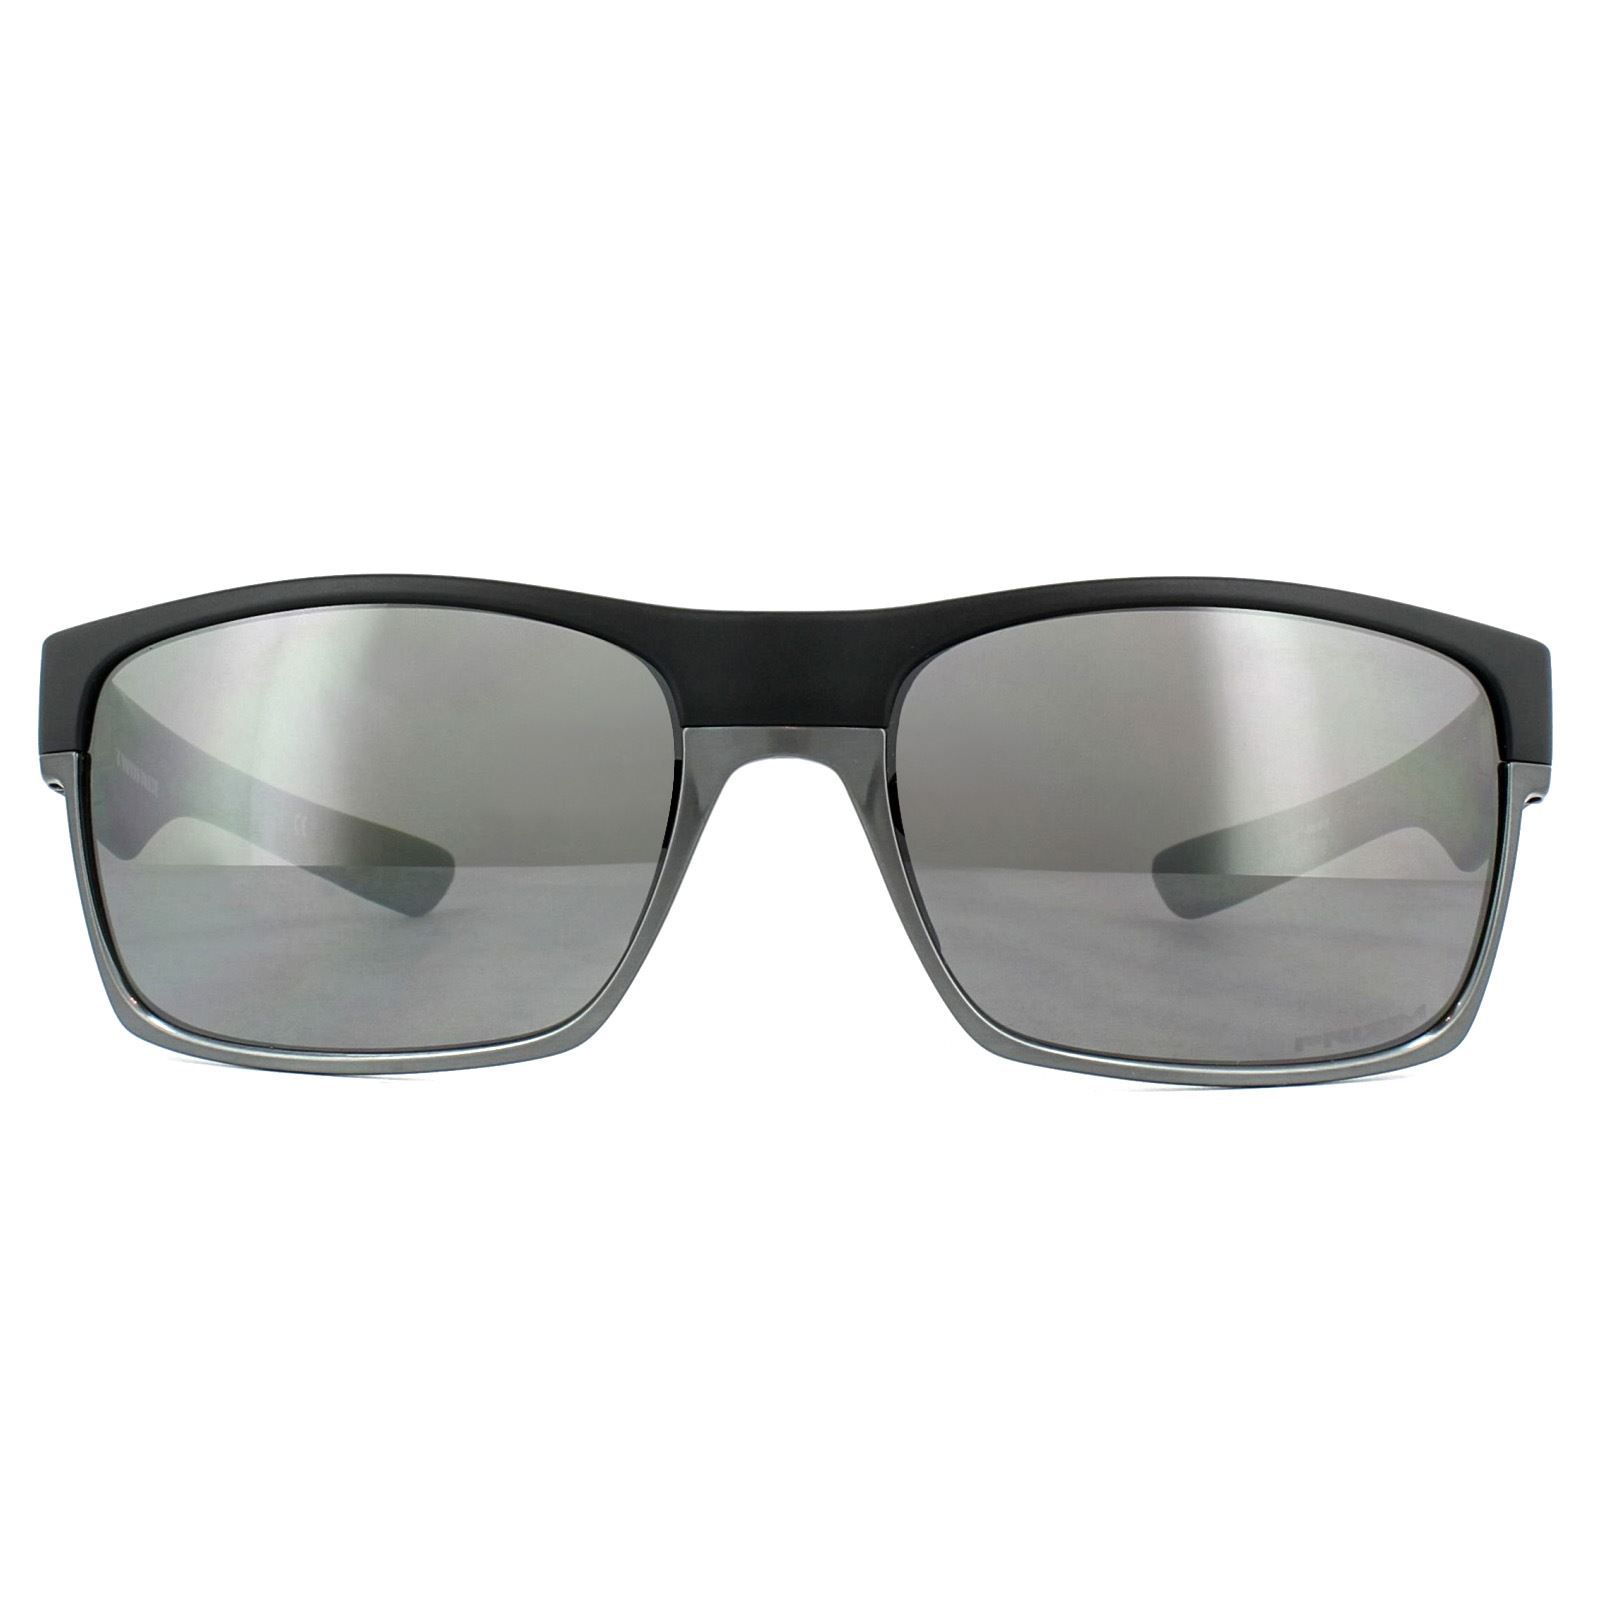 Oakley Sunglasses TwoFace OO9189-38 Matt Black Prizm Daily Polarized literally a two-tone frame with an aluminium lower frame and O Matter upper frame. Classic styling and the usual quality lenses from Oakley combine to give a winning pair of ultra modern sunglasses.